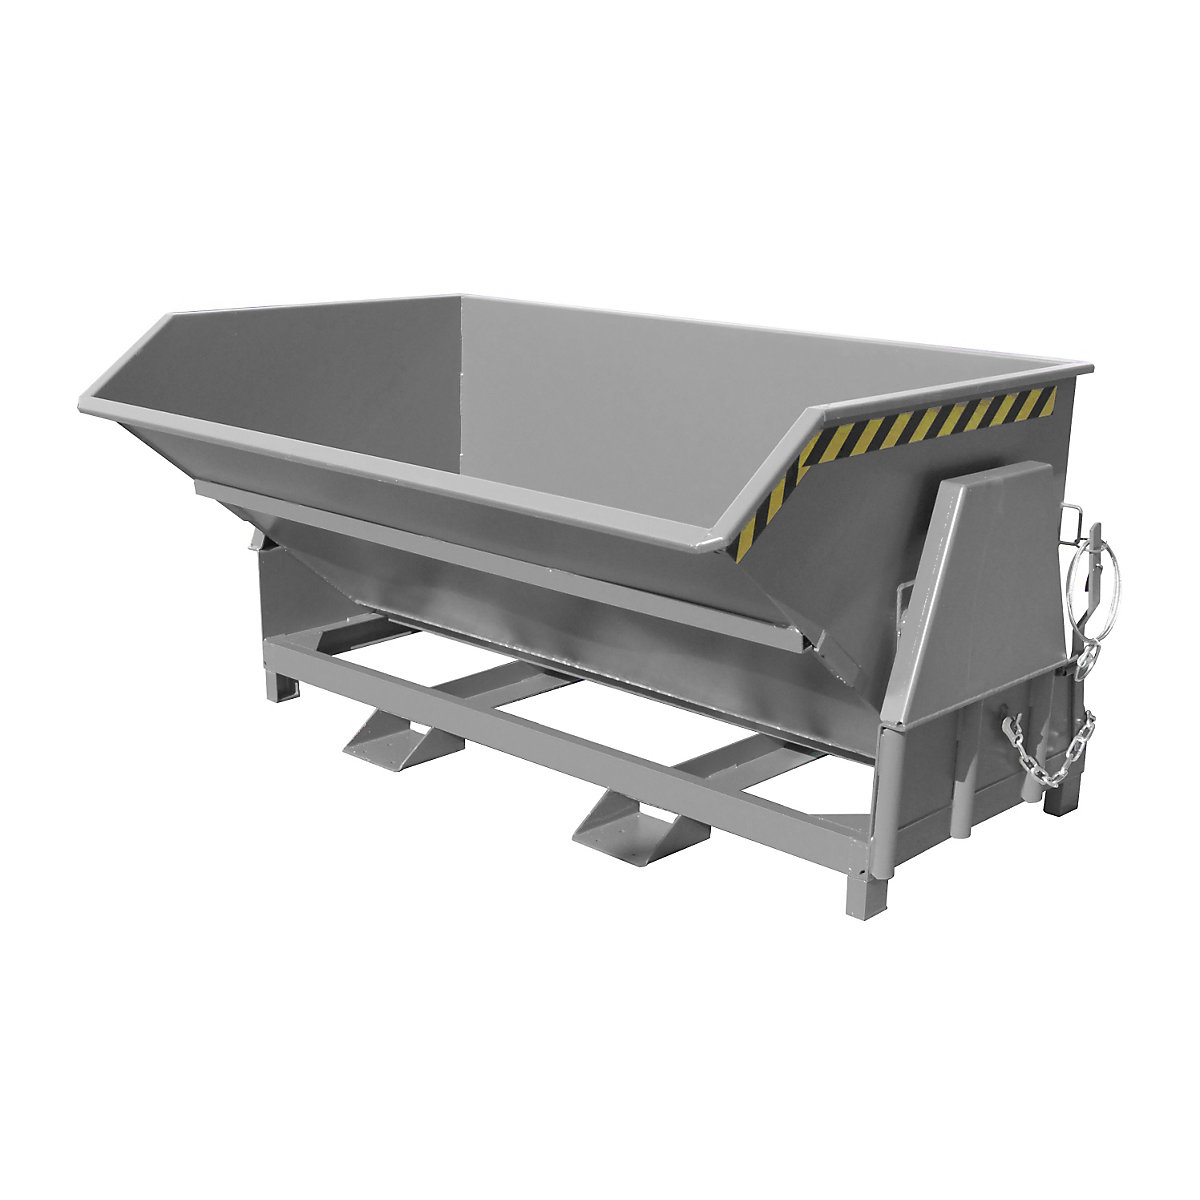 Tilting skip, standard overall height, without wheels – eurokraft pro, capacity 2.0 m³, painted grey RAL 7005-10